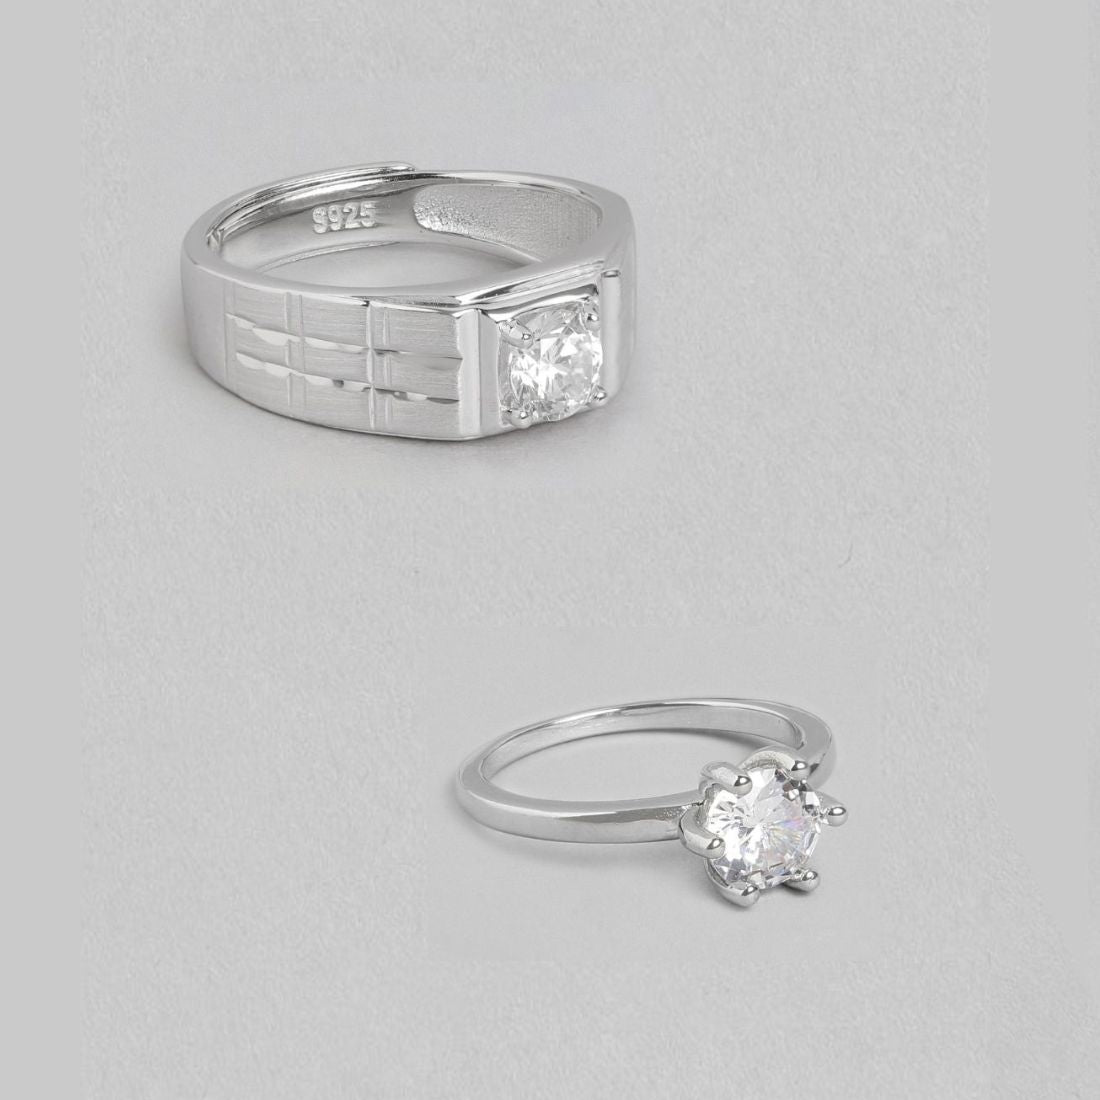 Endless Devotion Rhodium-Plated 925 Sterling Silver Couple Ring